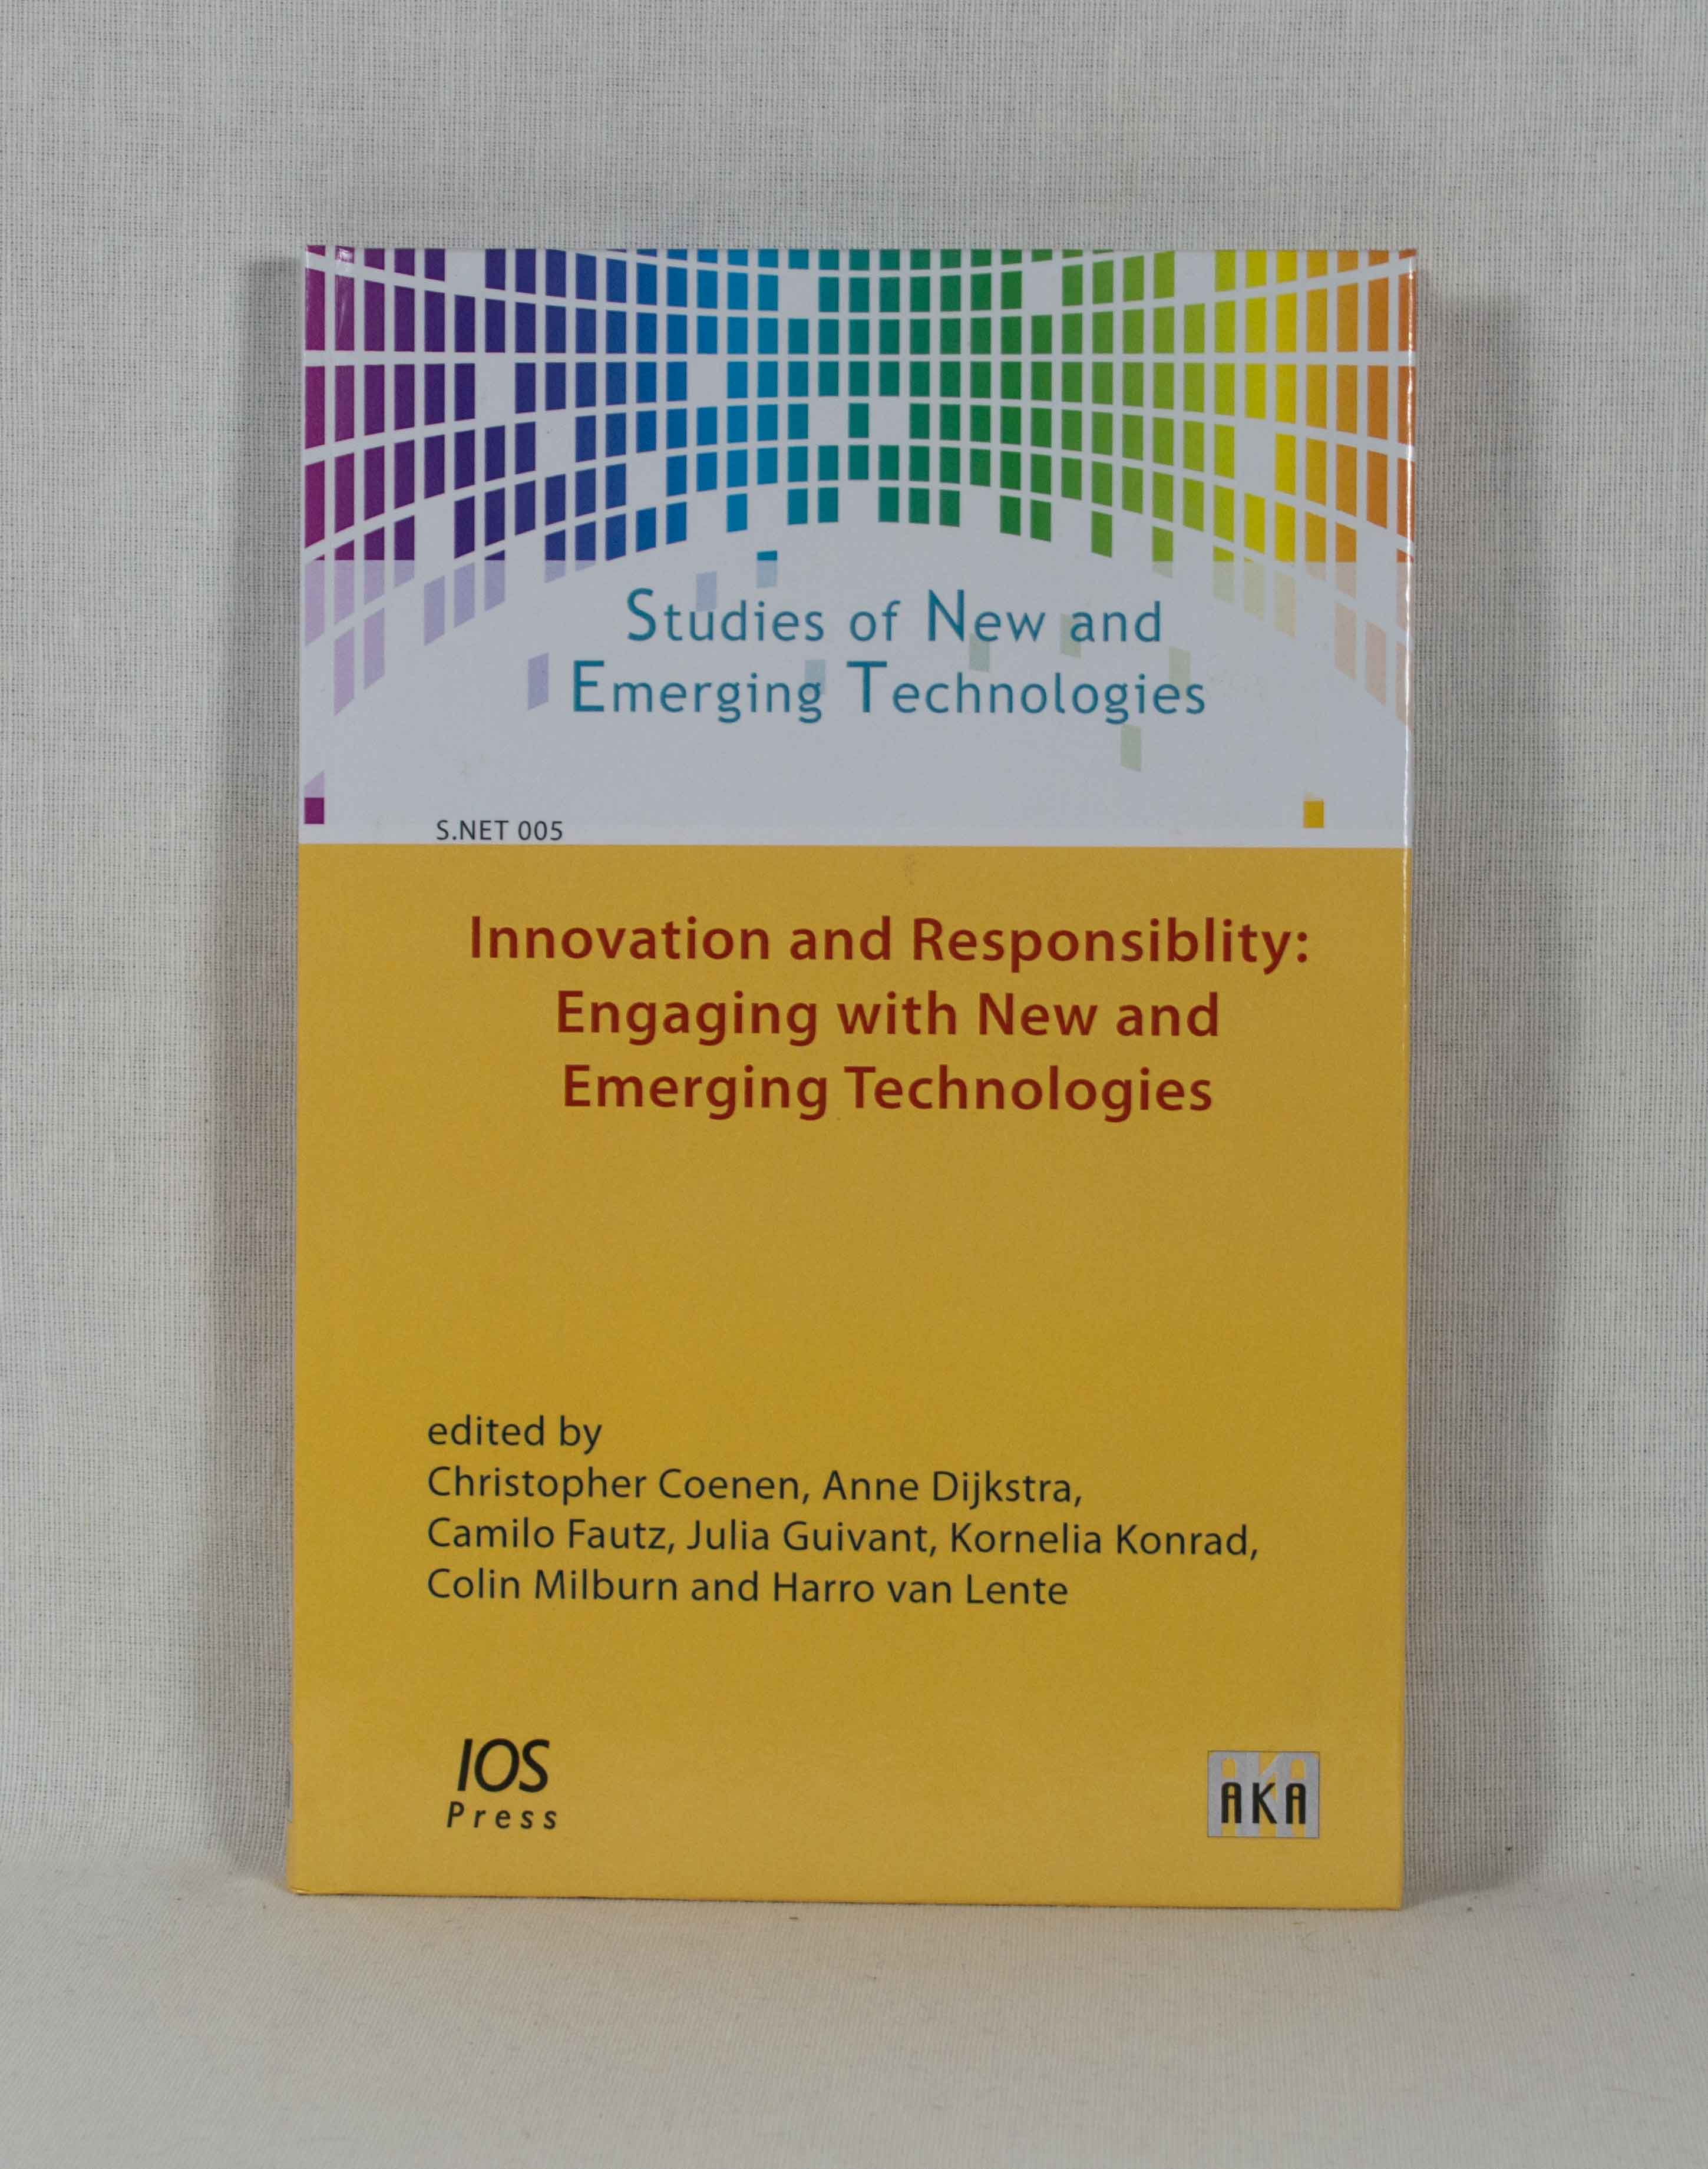 Innovation and Responsibility: Engaging with New and Emerging Technologies. (= Studies of New and Emerging Technologies, Vol. 005). - Coenen, Christopher, Anne Dijkstra Camilo Fautz (Eds.) a. o.